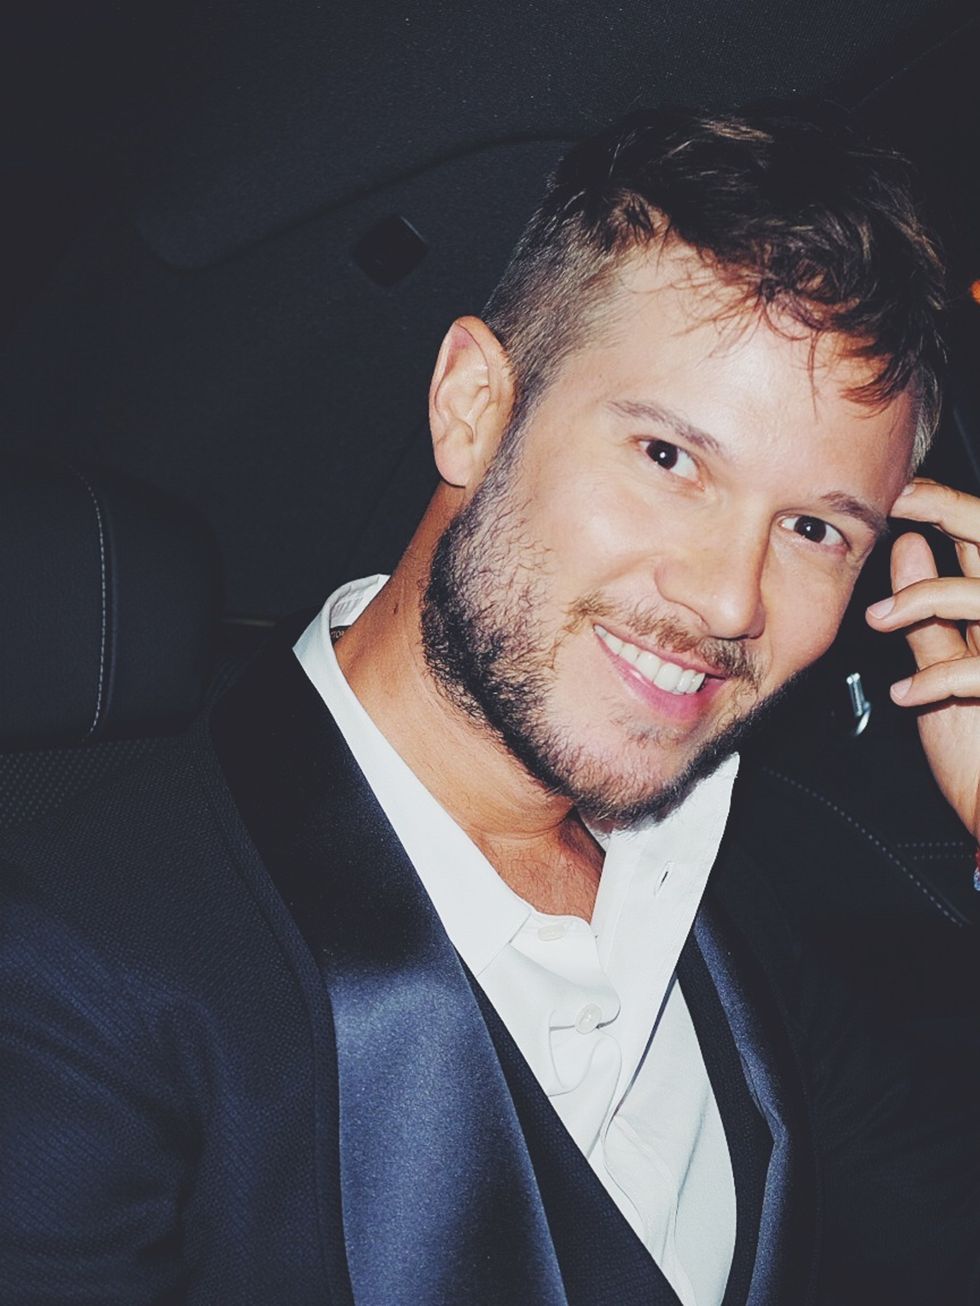 Outerwear, Facial hair, Jaw, Blazer, Cool, Tooth, Beard, Flash photography, Pleased, Thumb, 